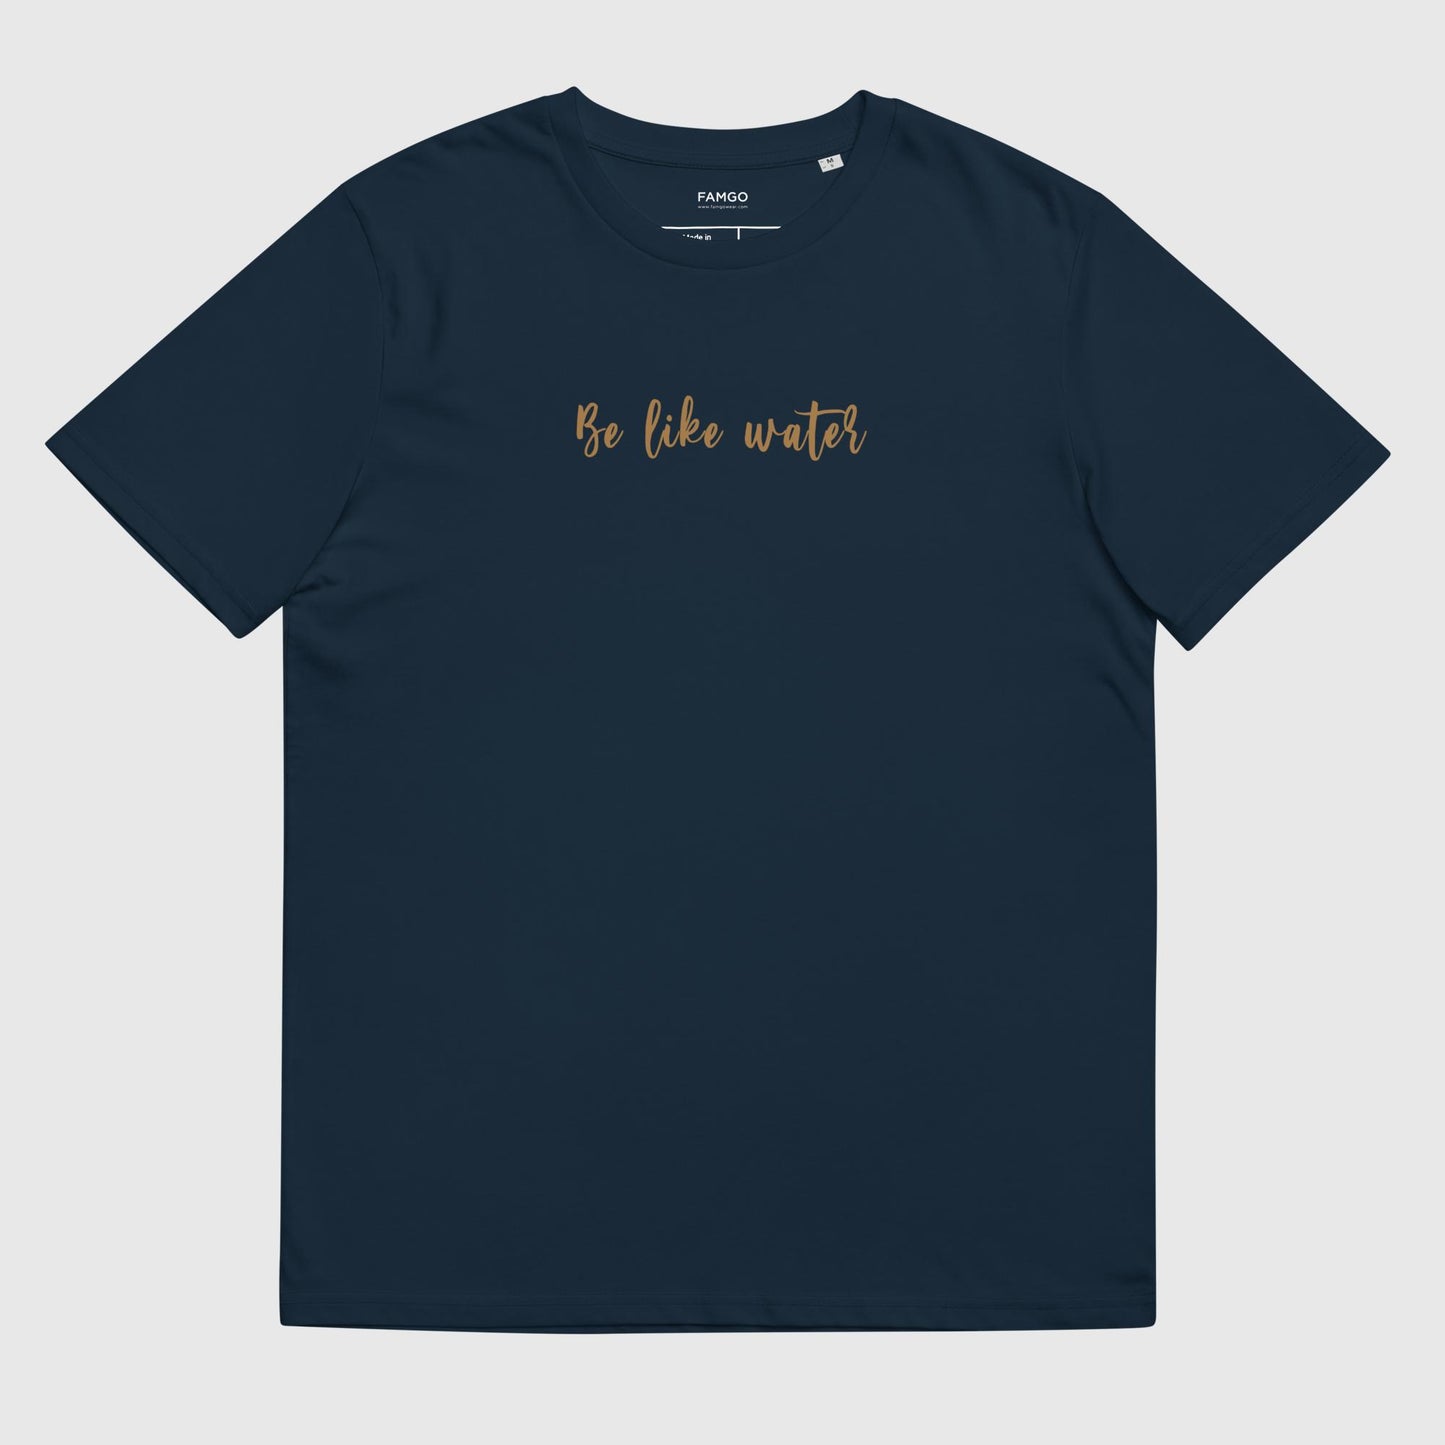 Men's french navy organic cotton t-shirt that features Bruce Lee's inspirational quote, "Be Like Water."